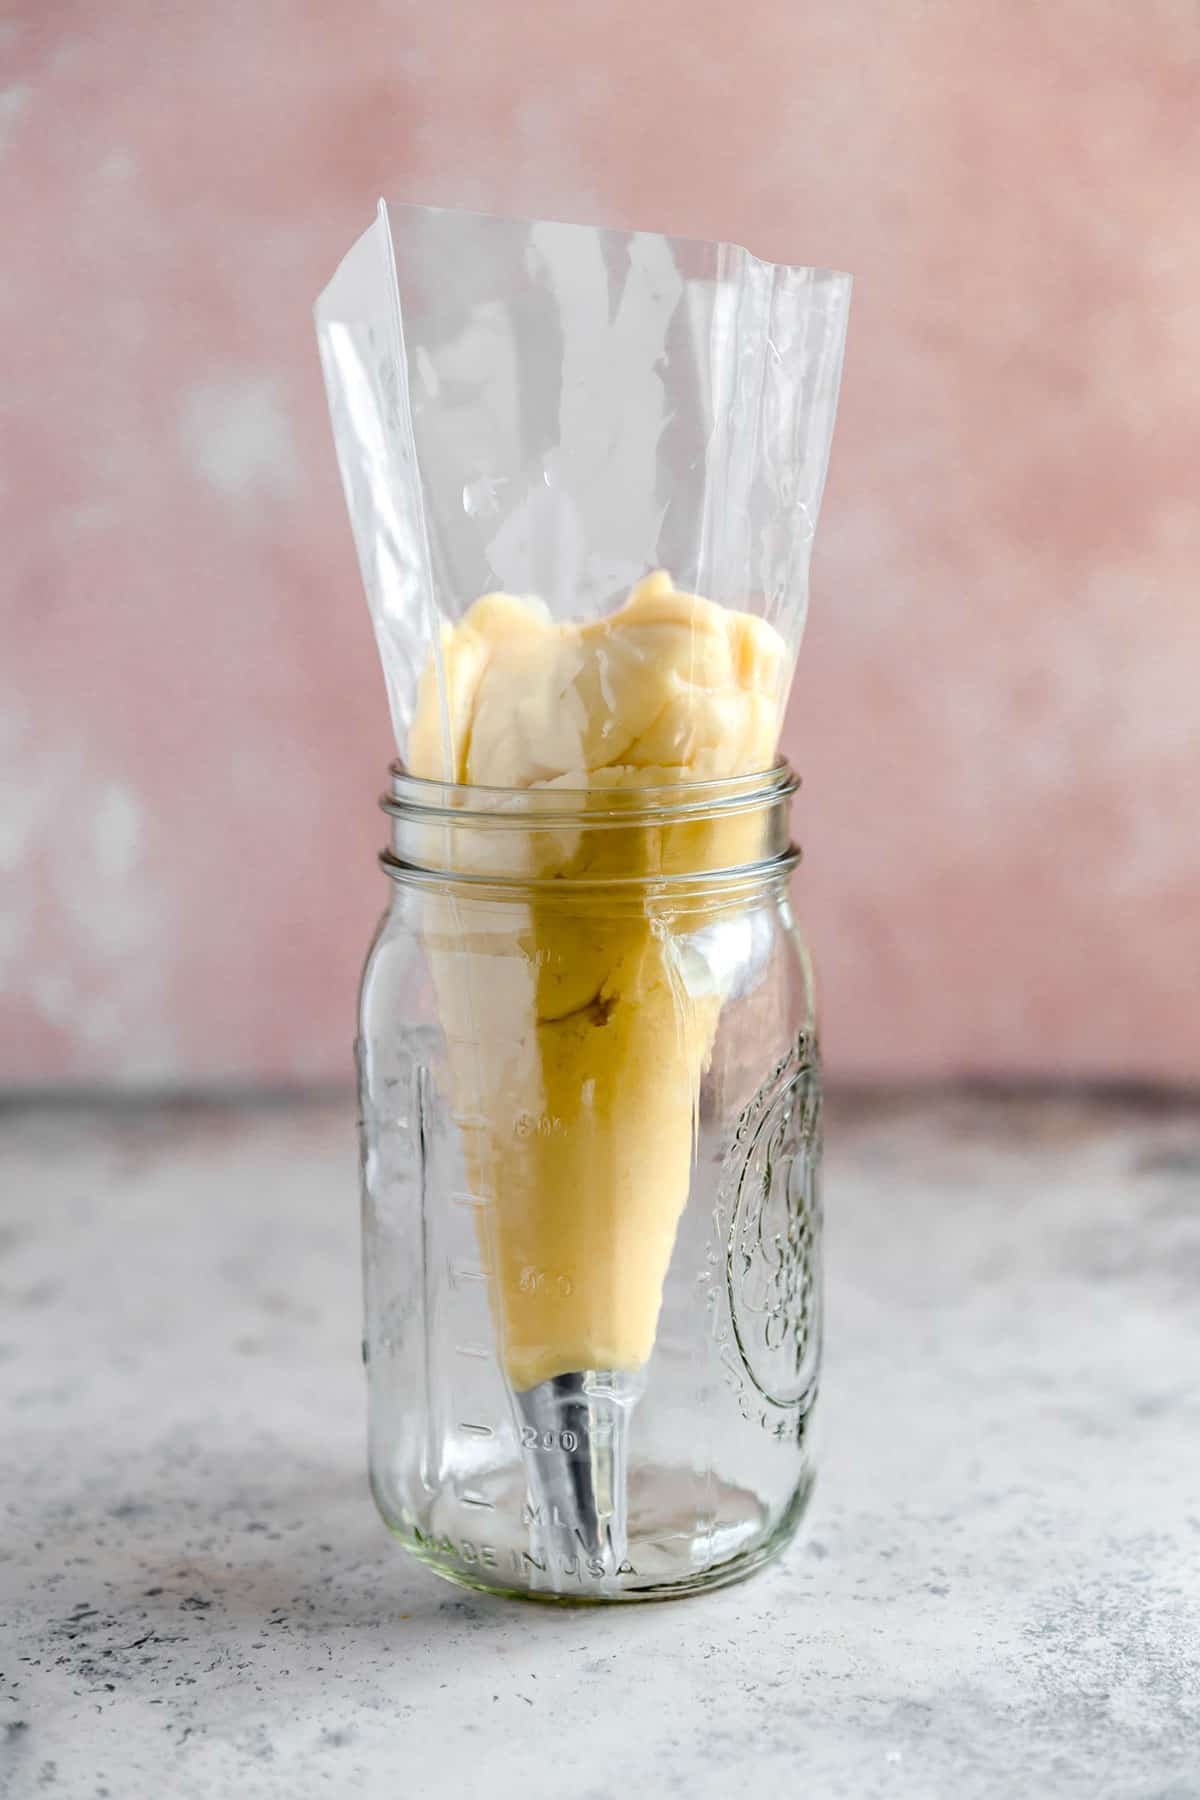 A pastry bag fitted with a star tip and filled with choux pastry in a mason jar to hold it up.